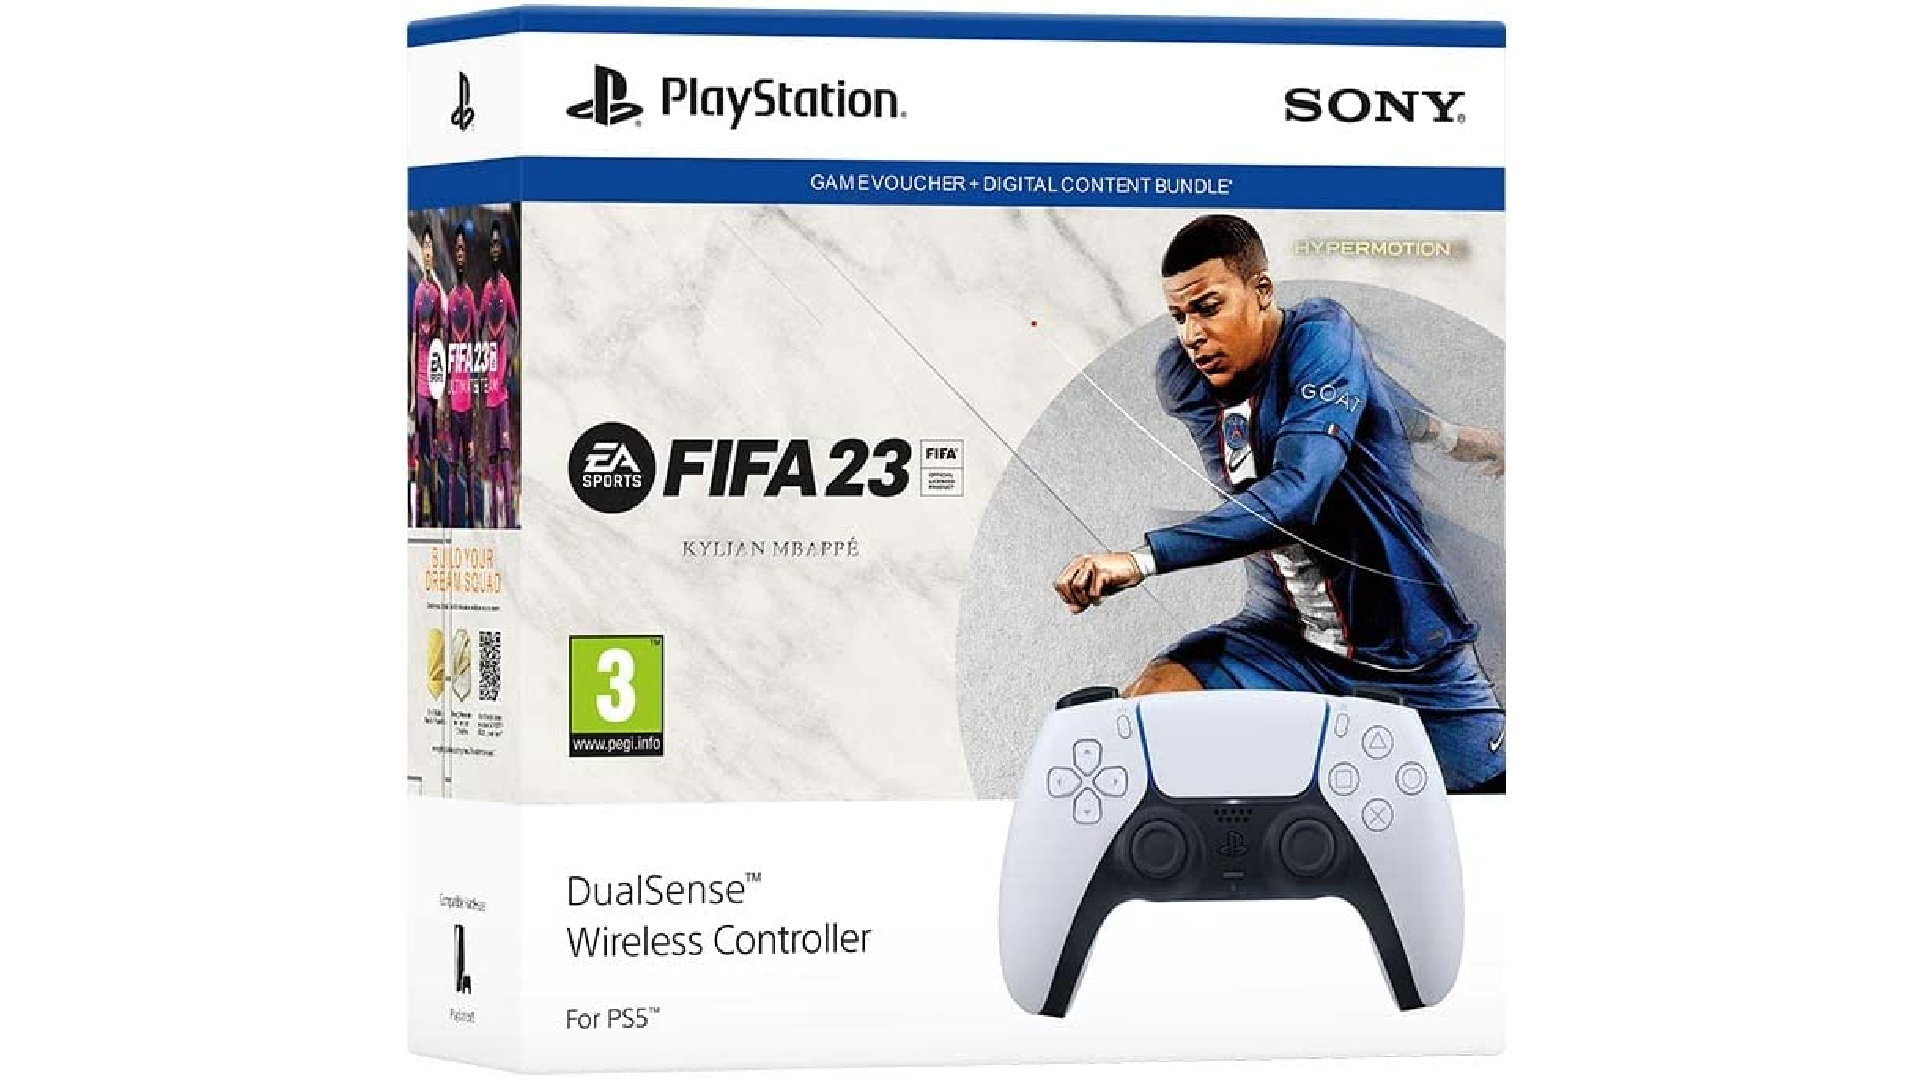 Image for Save £30 on this FIFA 23 and DualSense Controller bundle